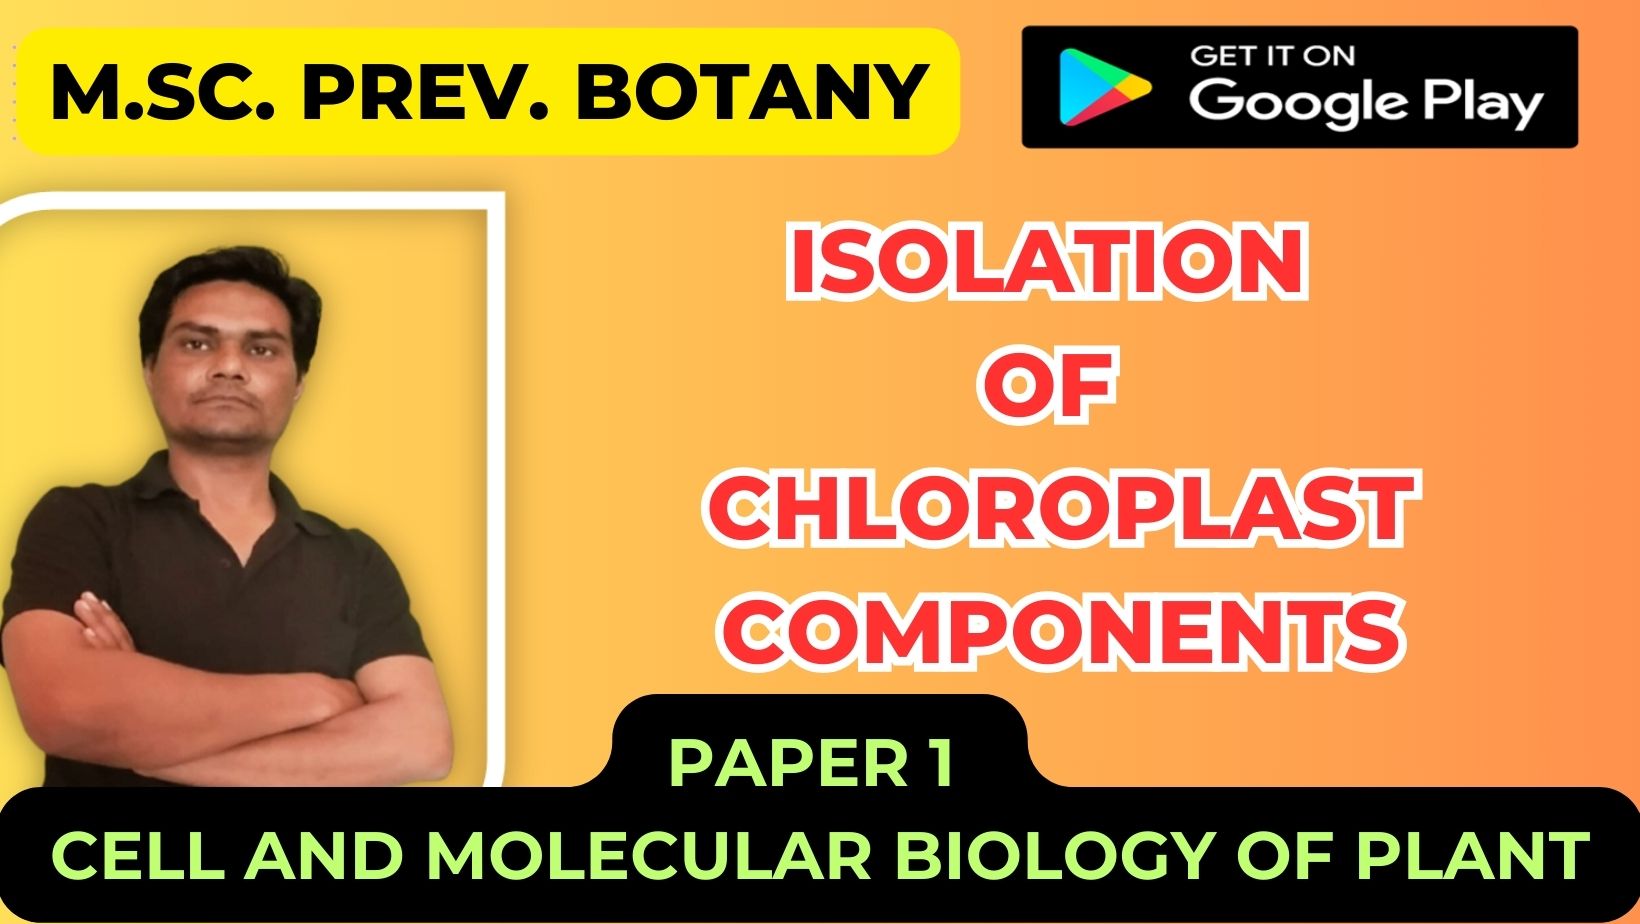 You are currently viewing ISOLATION OF CHLOROPLAST COMPONENTS